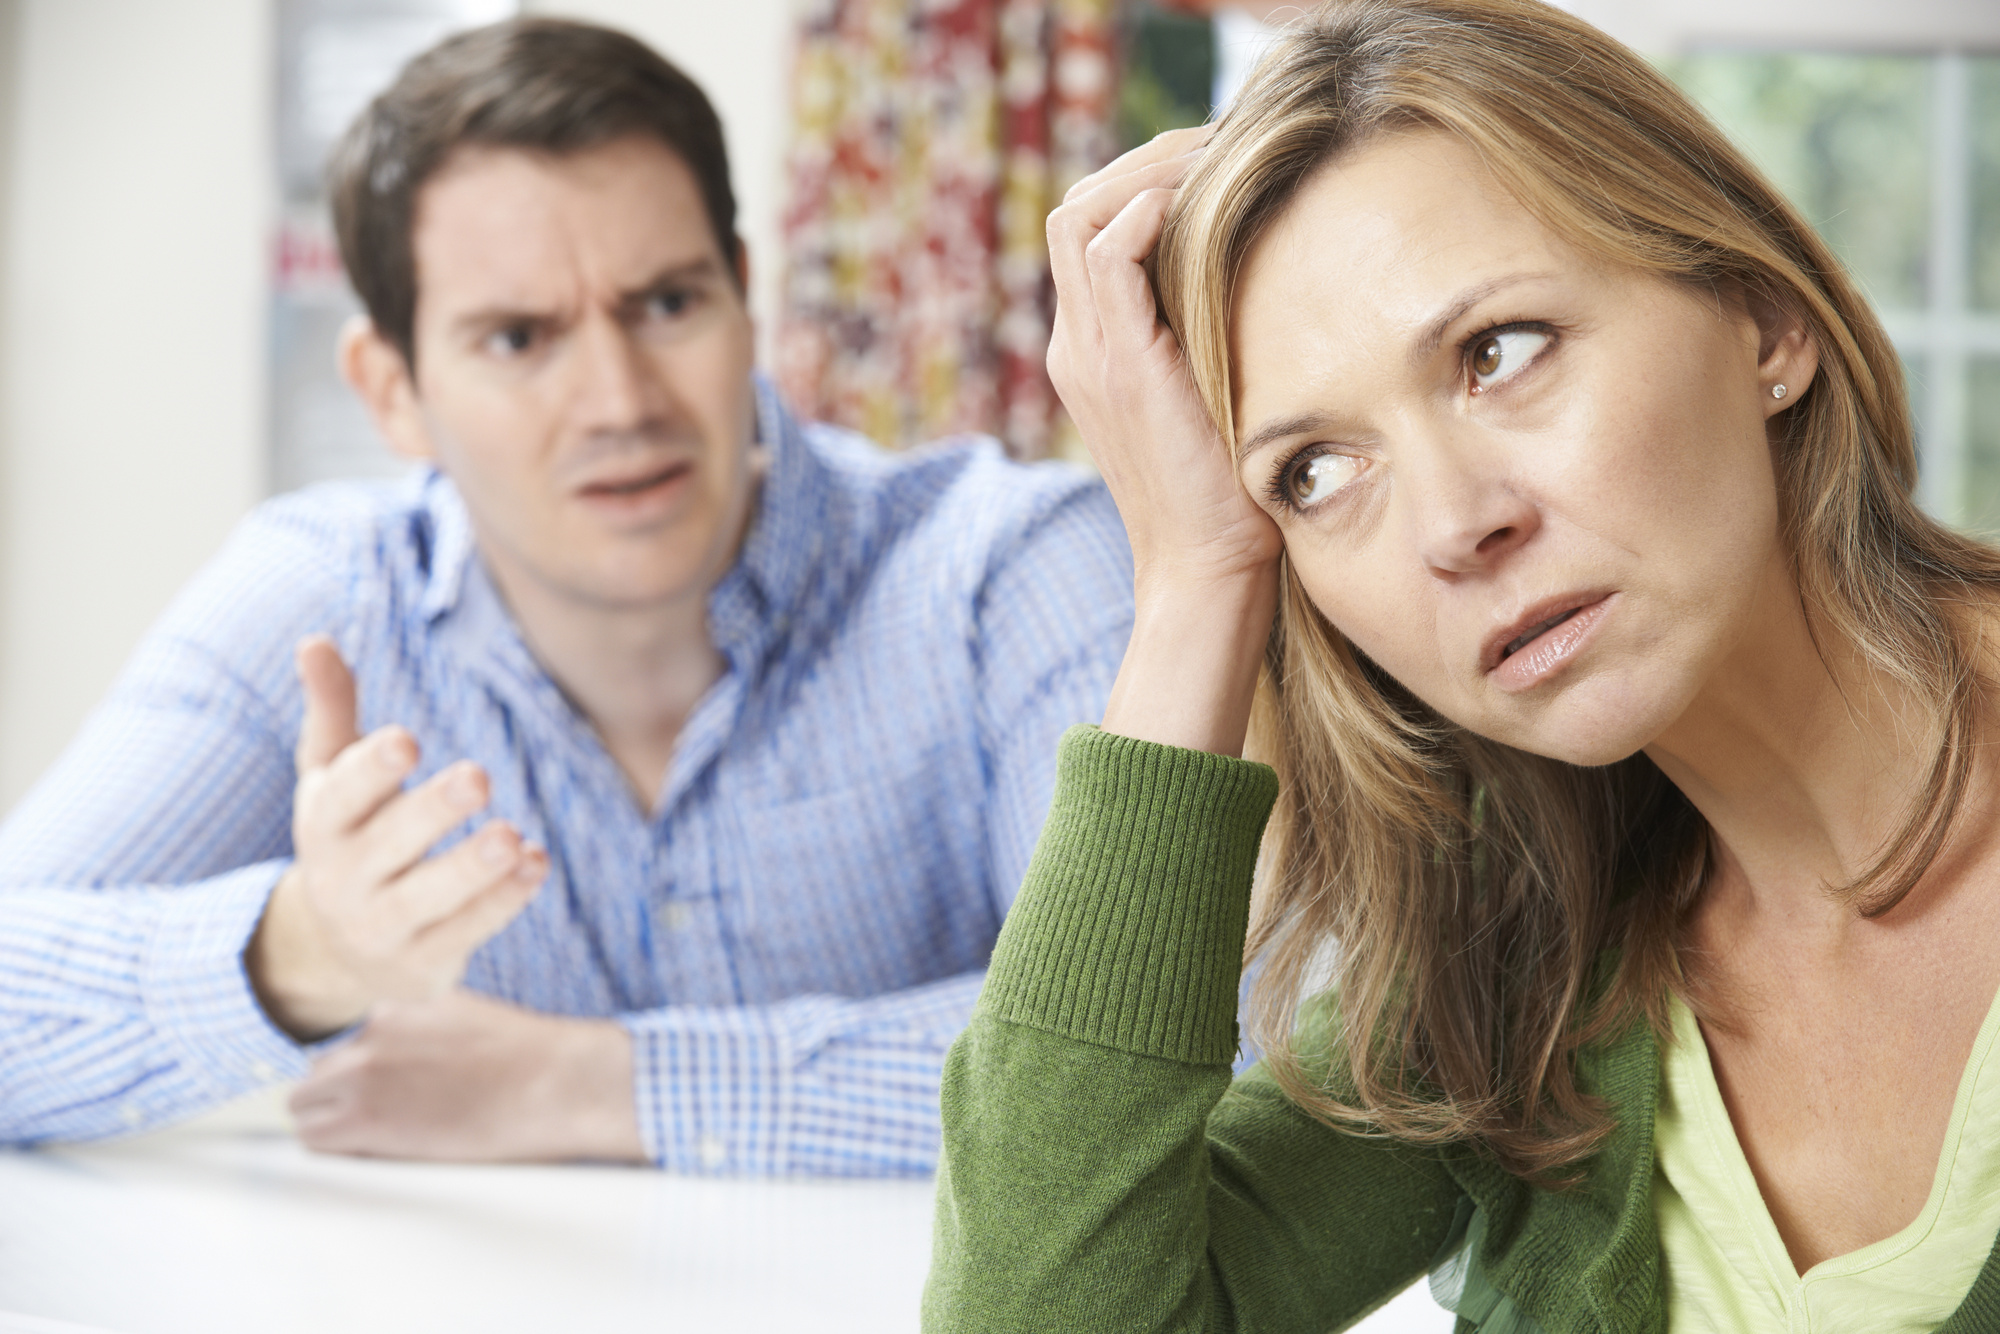 7 Tips For Communication Problems in Your Relationship